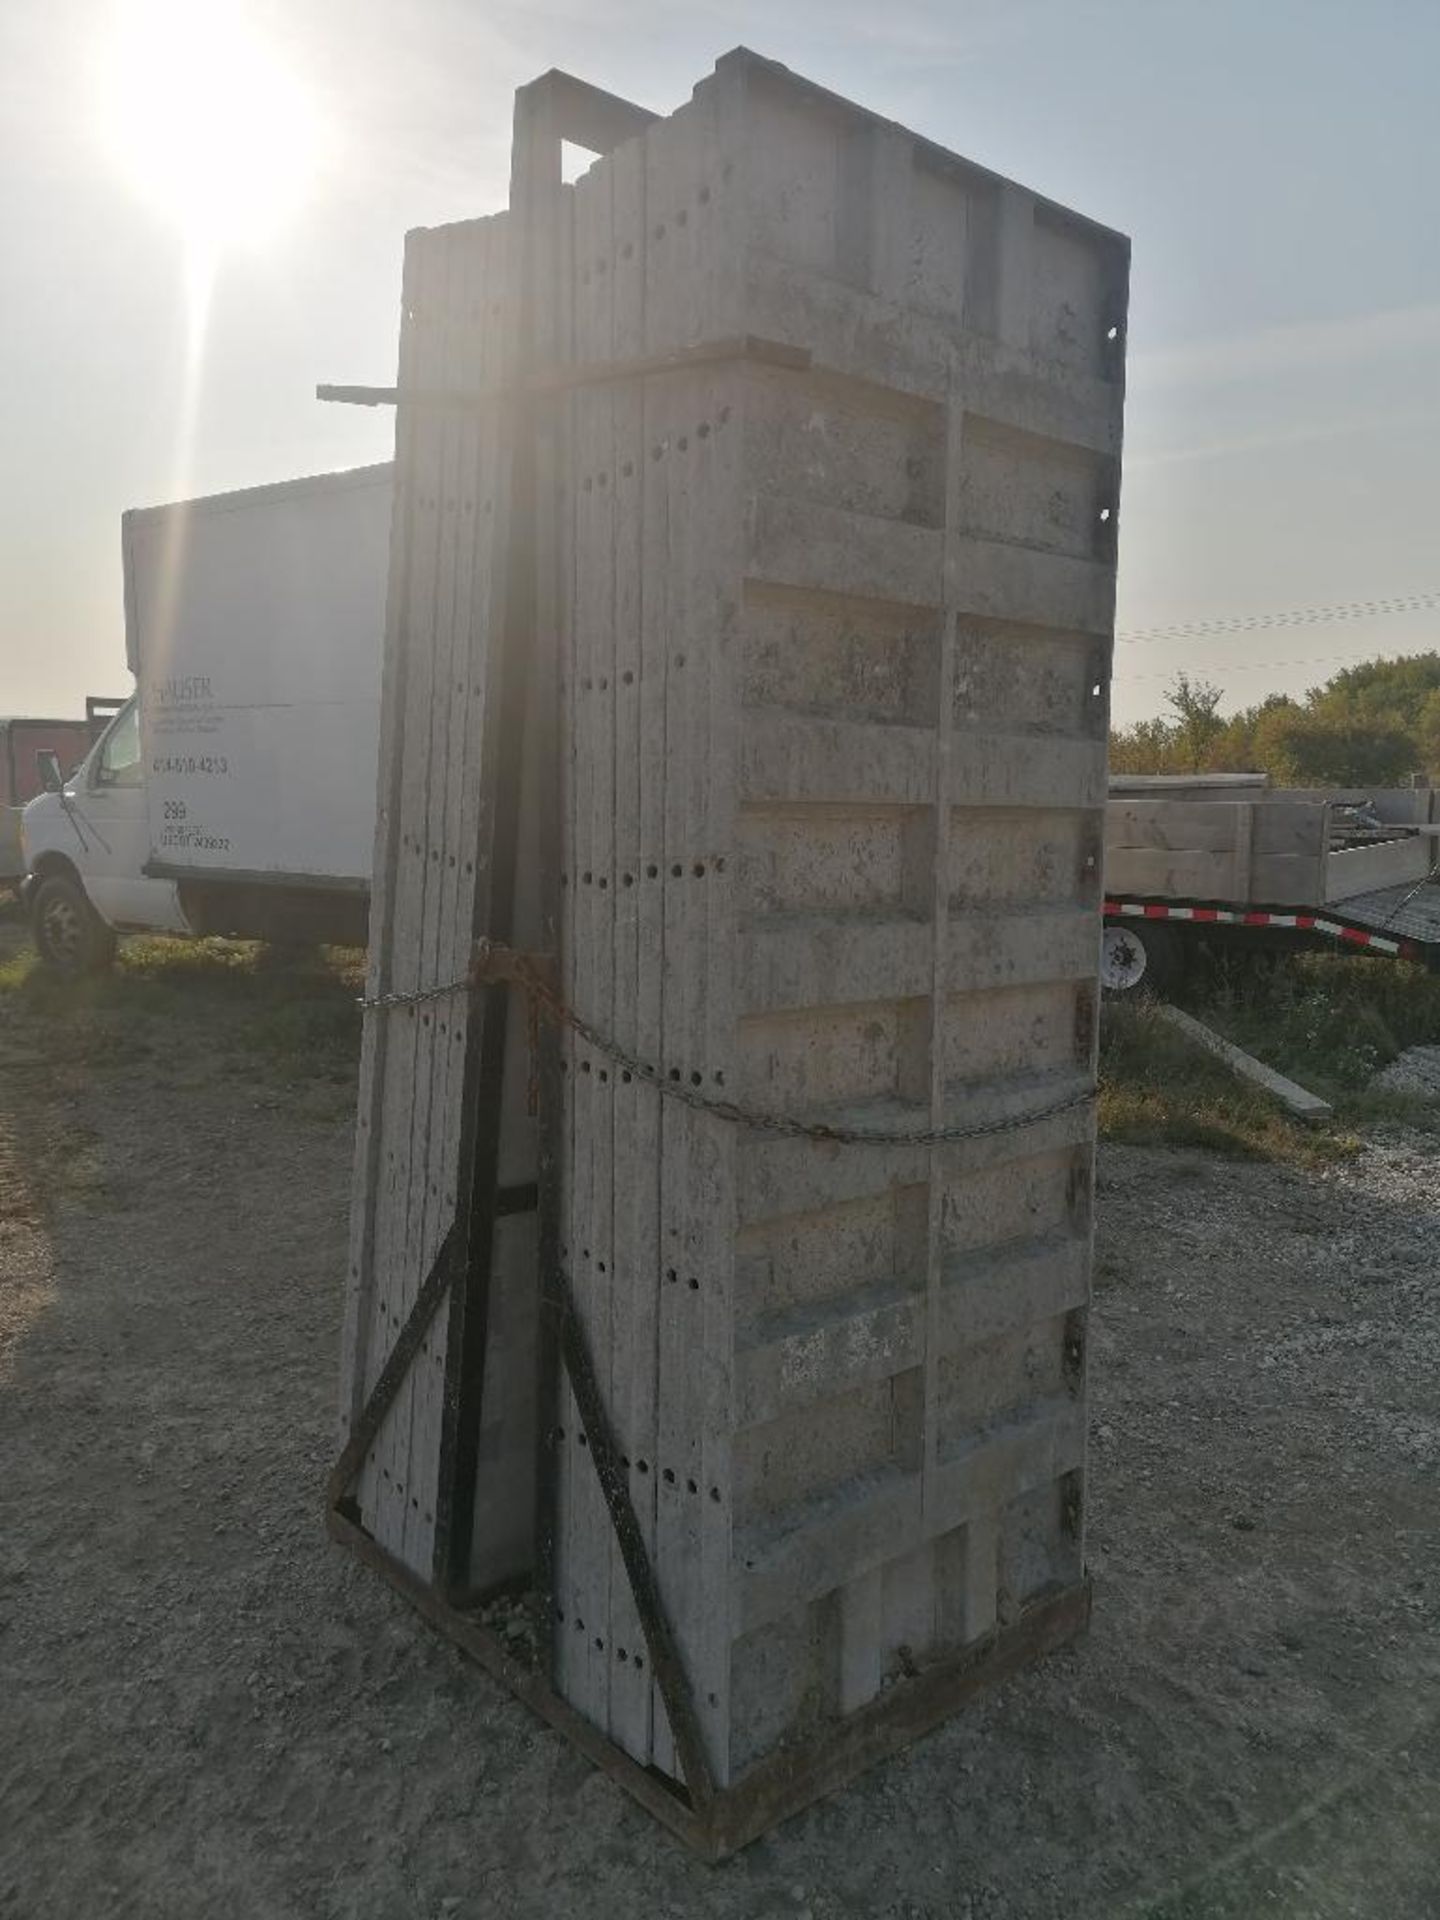 (16) 36" x 8' Smooth Aluminum Concrete Forms 6-12 Hole Pattern, Bell Basket included. Located in - Bild 2 aus 8